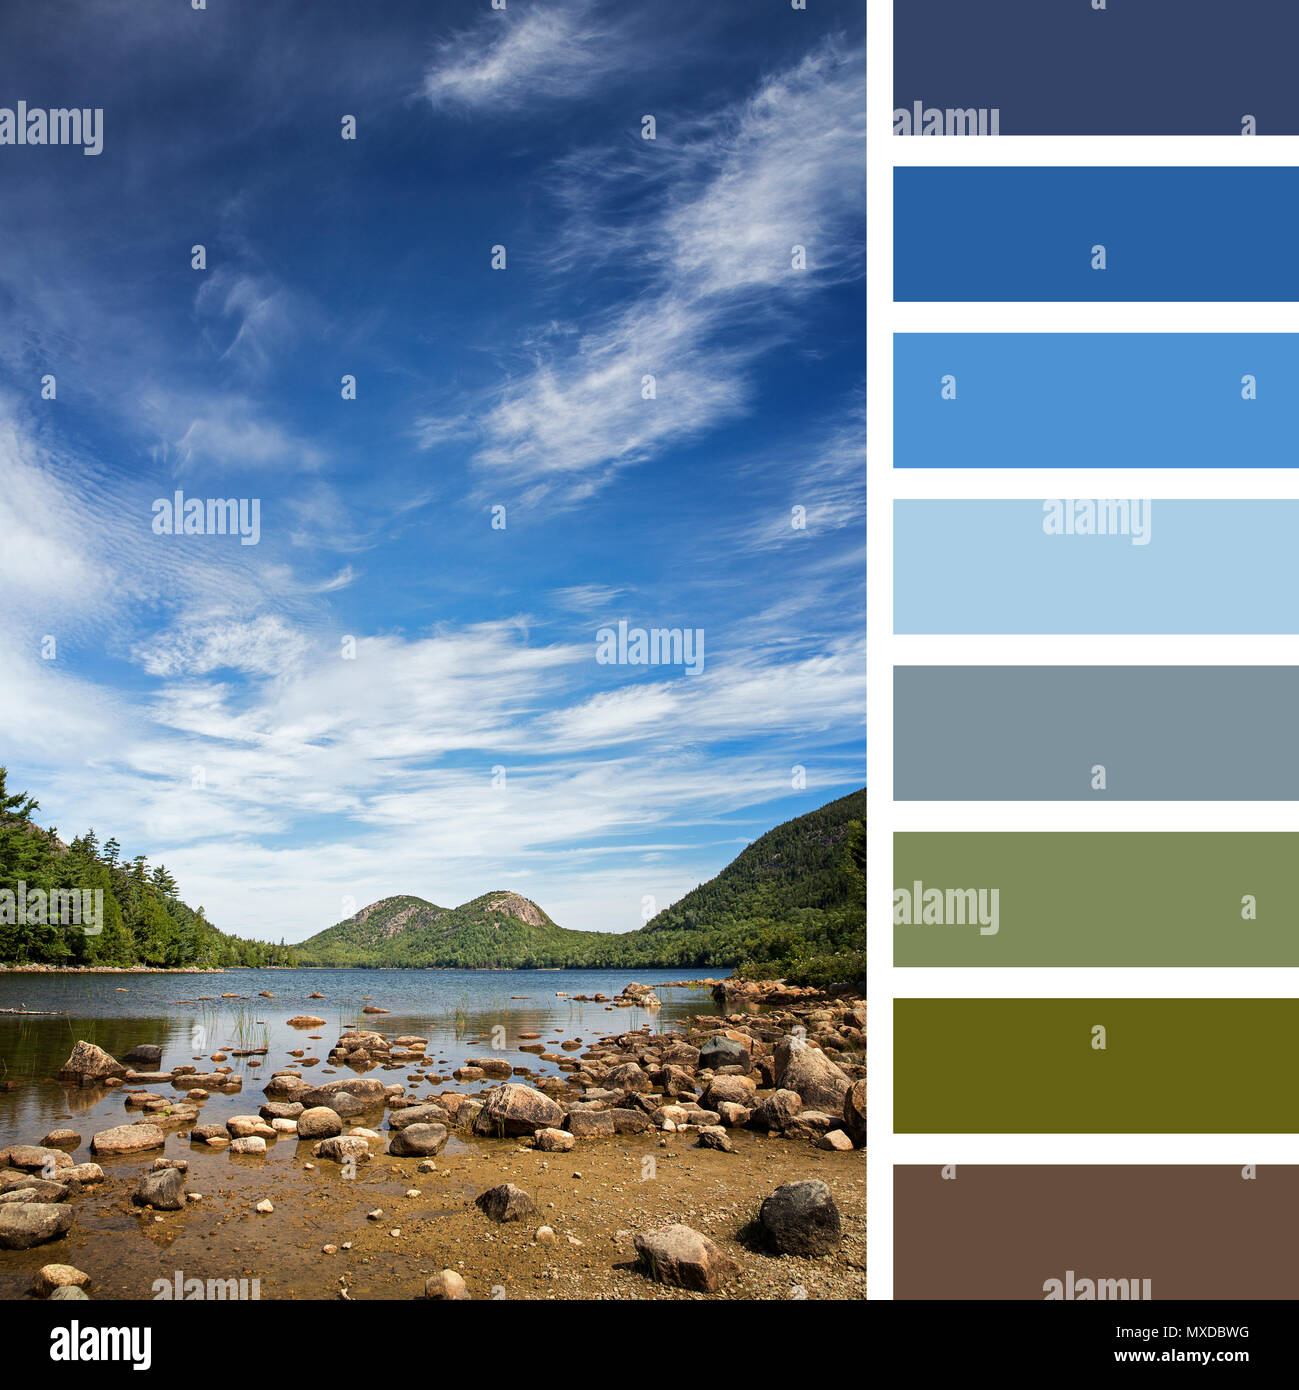 Jordan Pond, Acadia National Park, Mount Desert Island, maine, USA. In a colour palette with complimentary colour swatches. Stock Photo